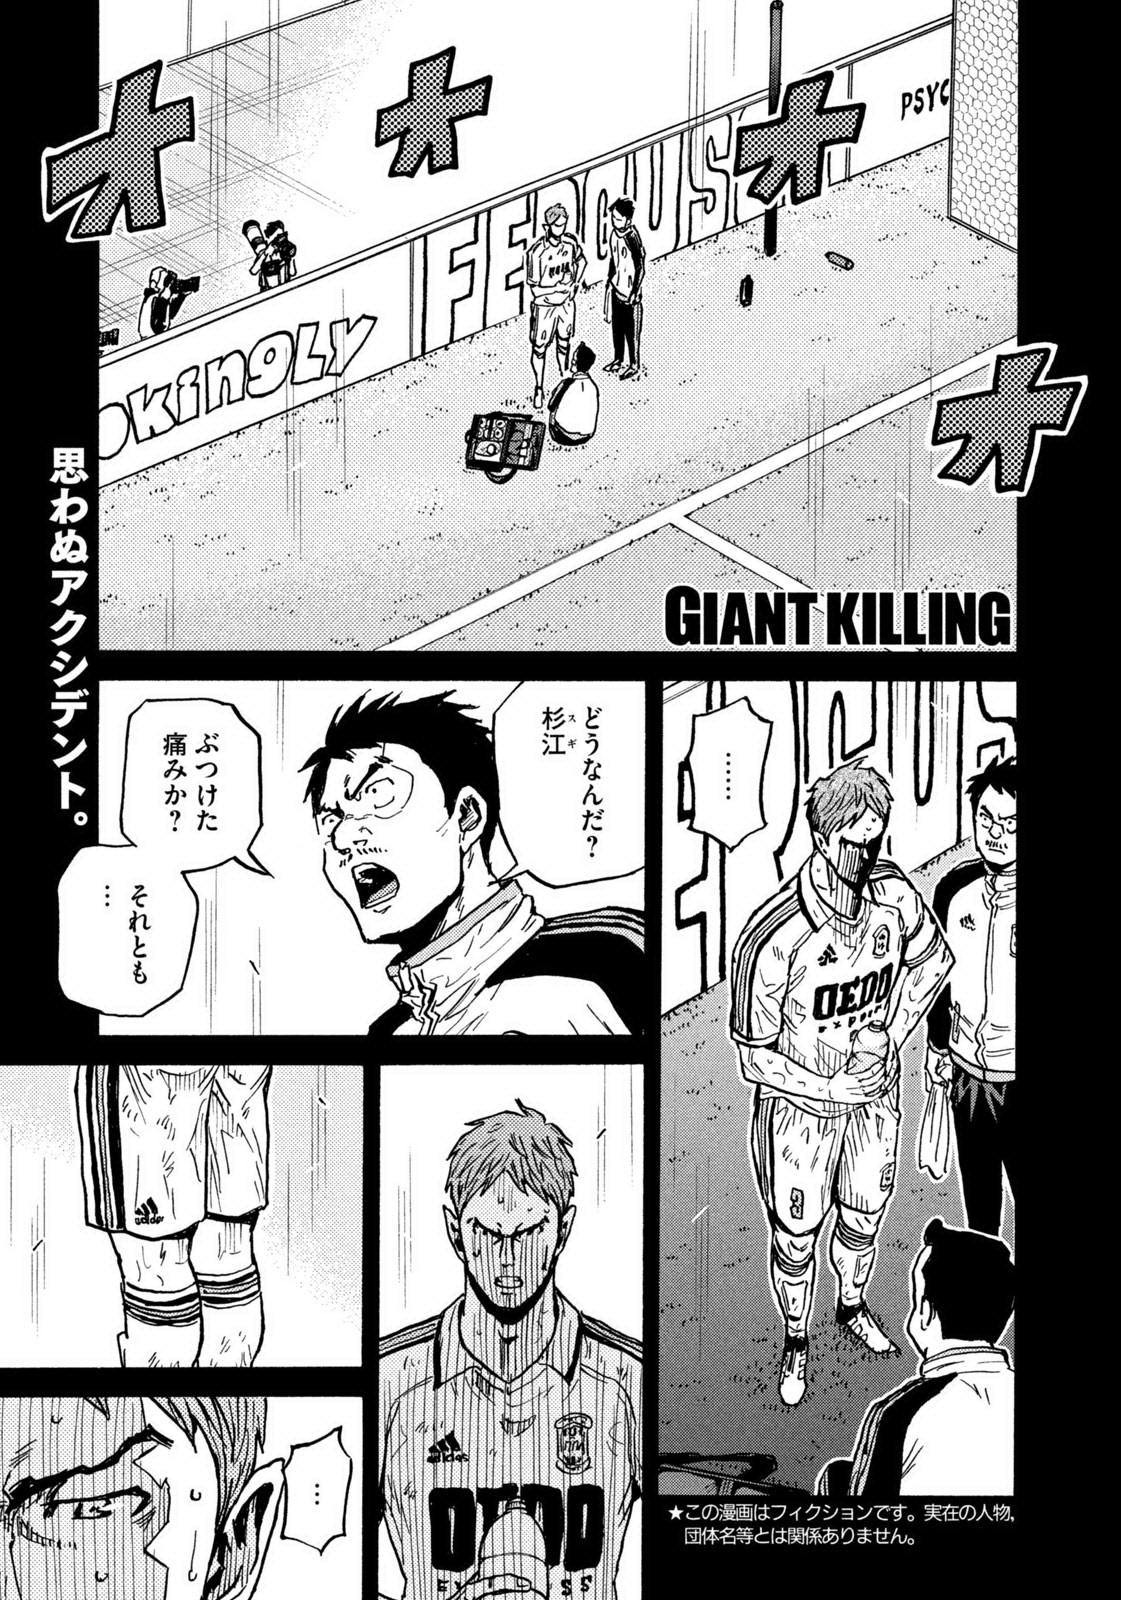 Giant Killing - Chapter 623 - Page 1